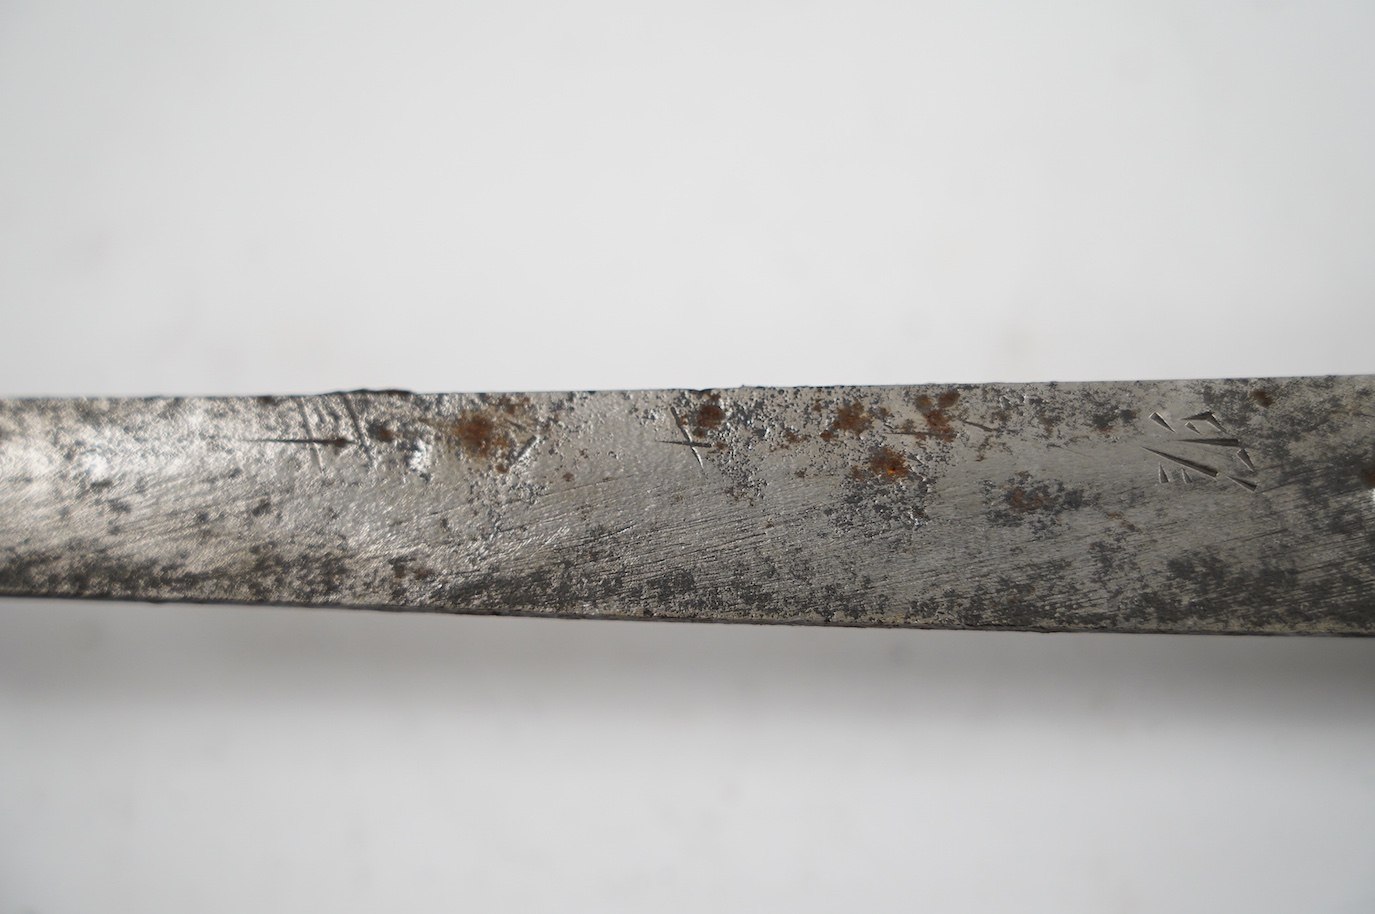 A Japanese WWII army officer’s sword Katana, blade 57.9cm, signed and dated with Seki Arsenal stamp, retaining good polish, in shin gunto mounts with leather combat cover on hilt and scabbard, the latter with plate stamp